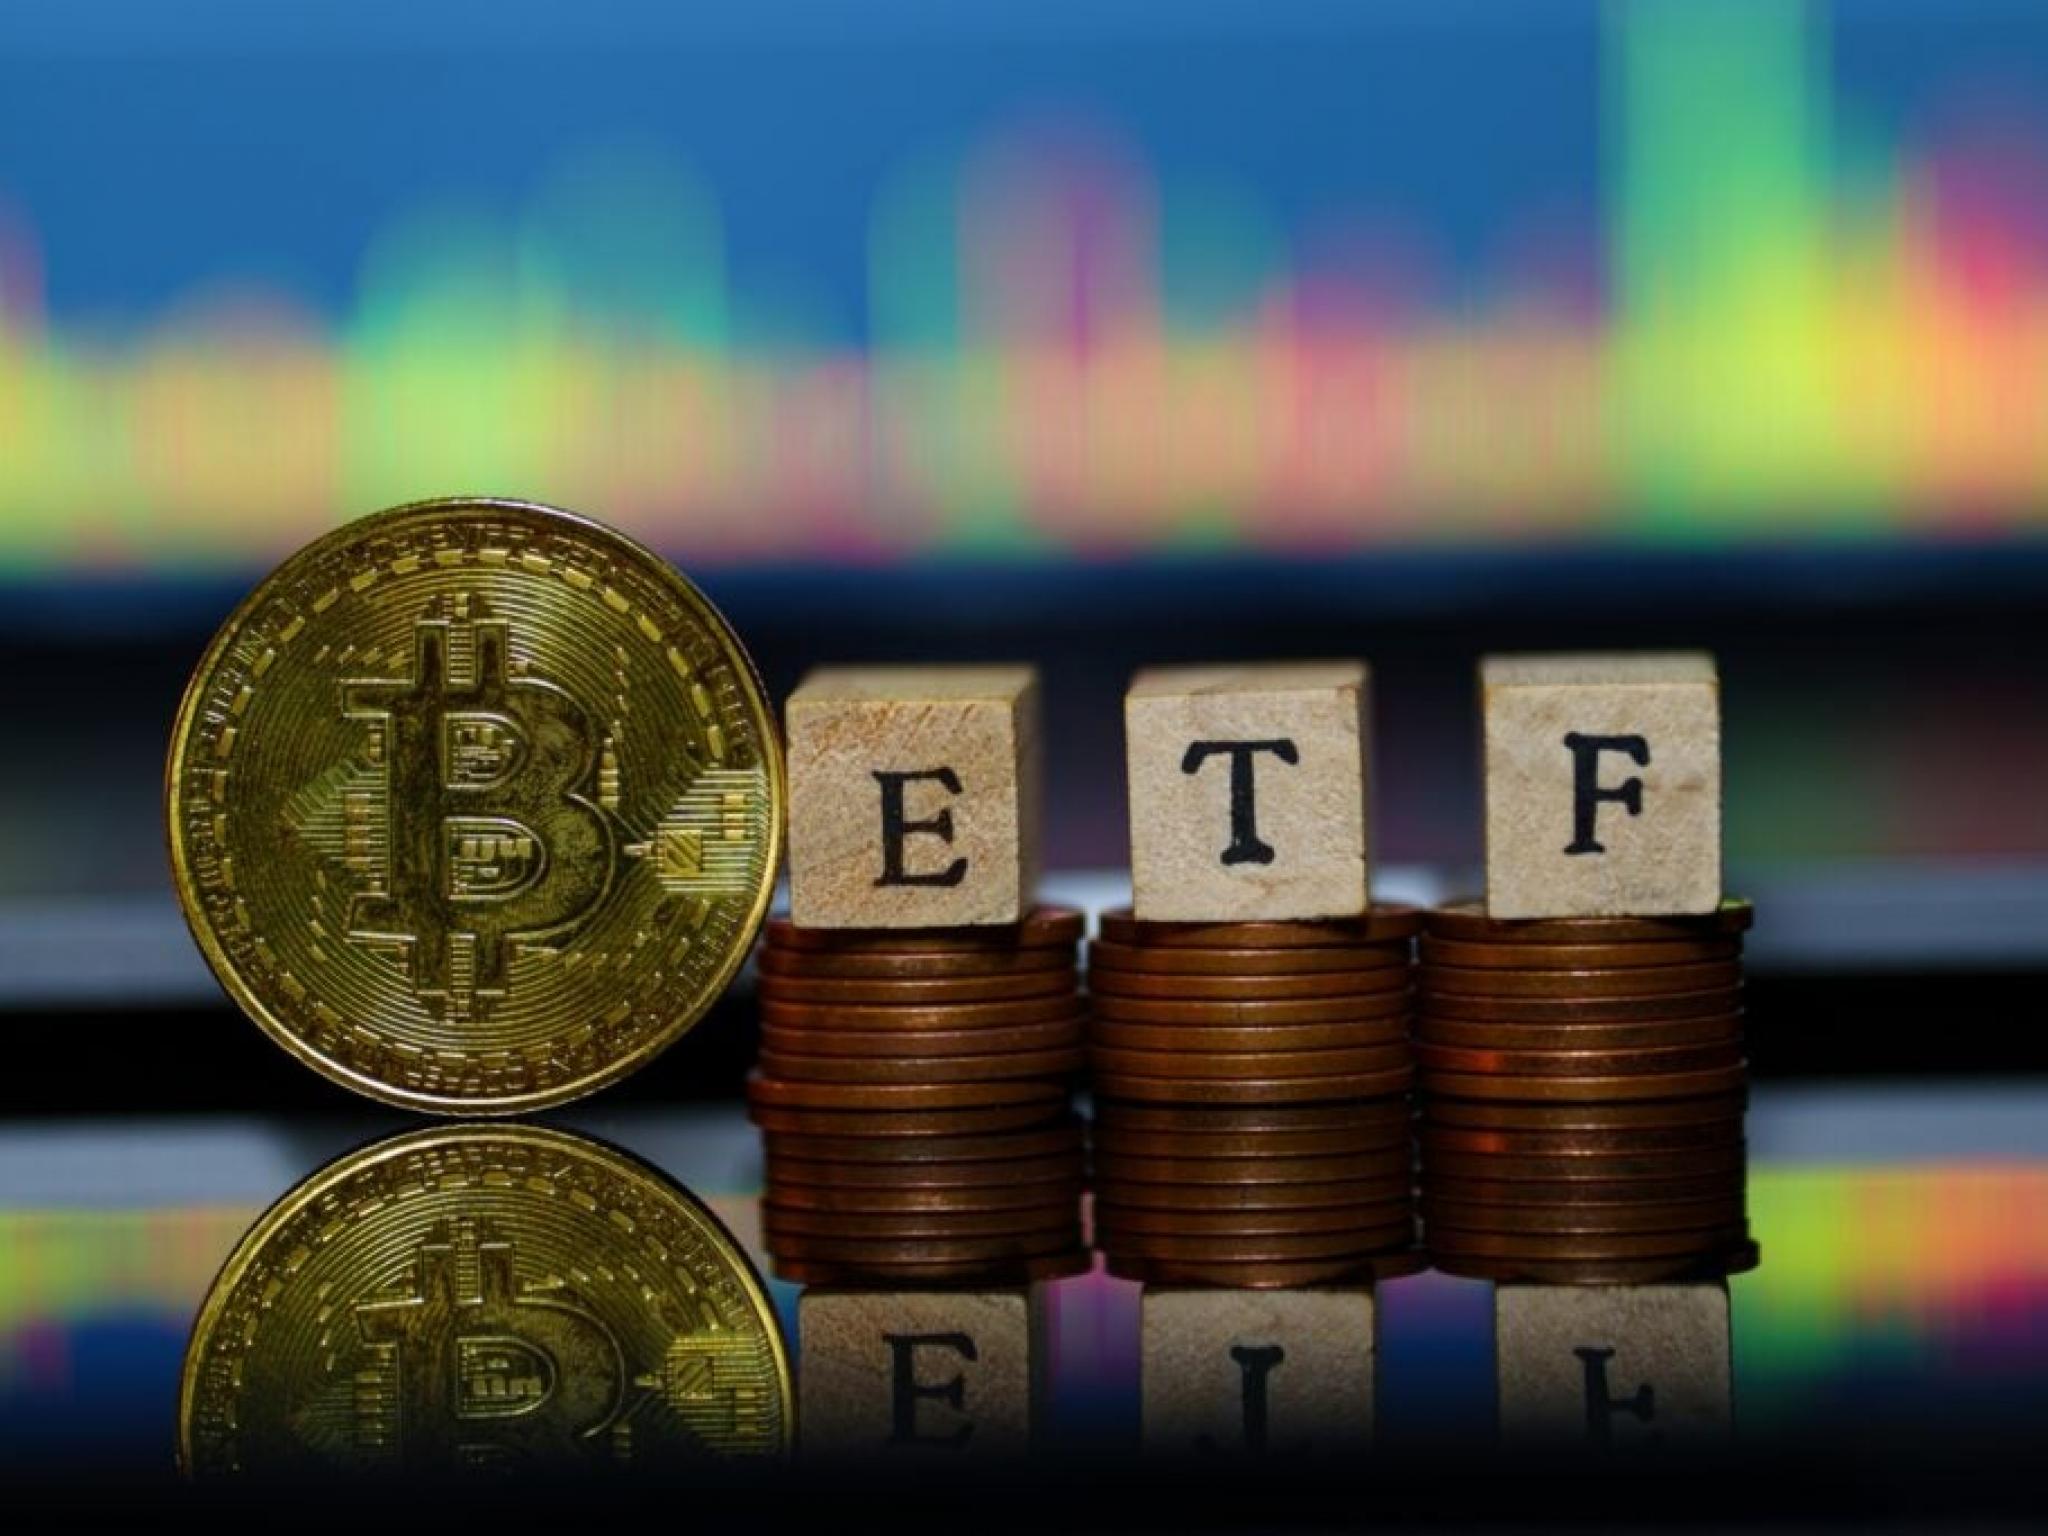  what-is-going-on-with-bitcoin-ethereum-etfs-ahead-of-the-fomc-meeting 